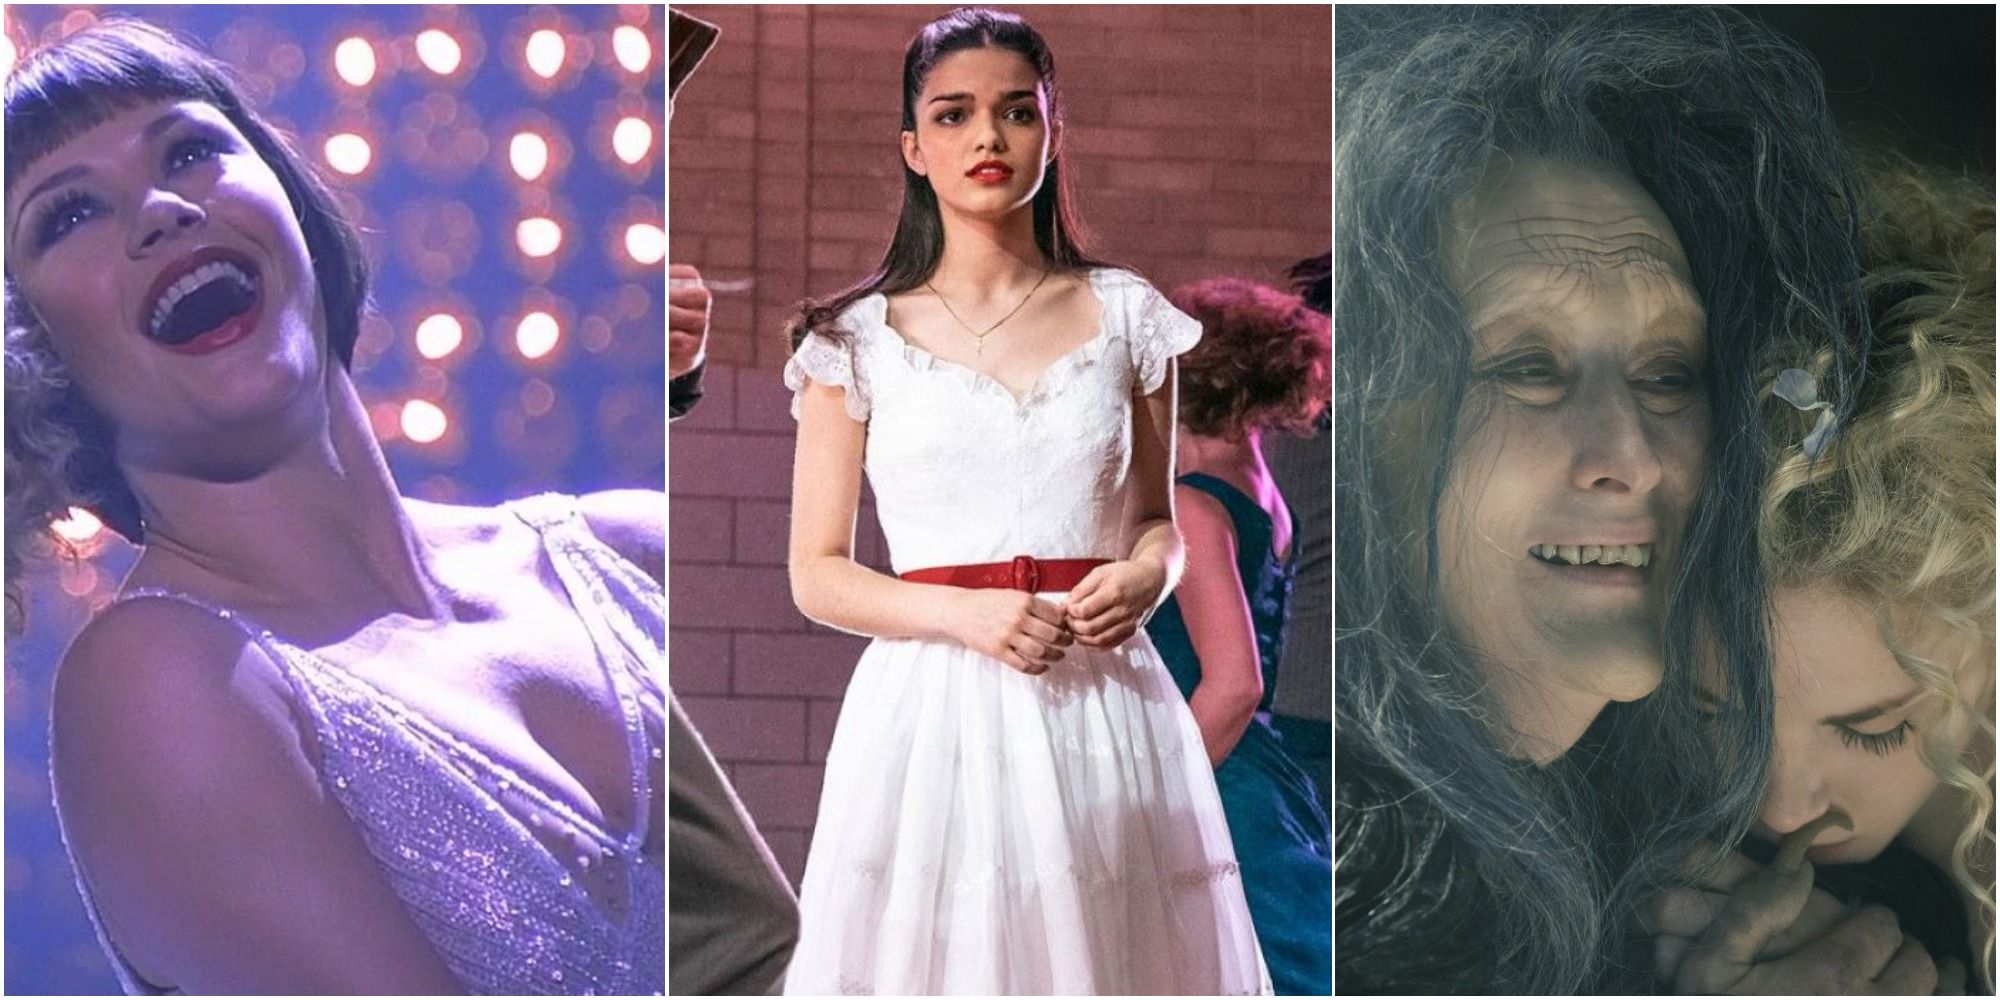 10 Movie Musicals to Watch Before 'West Side Story'